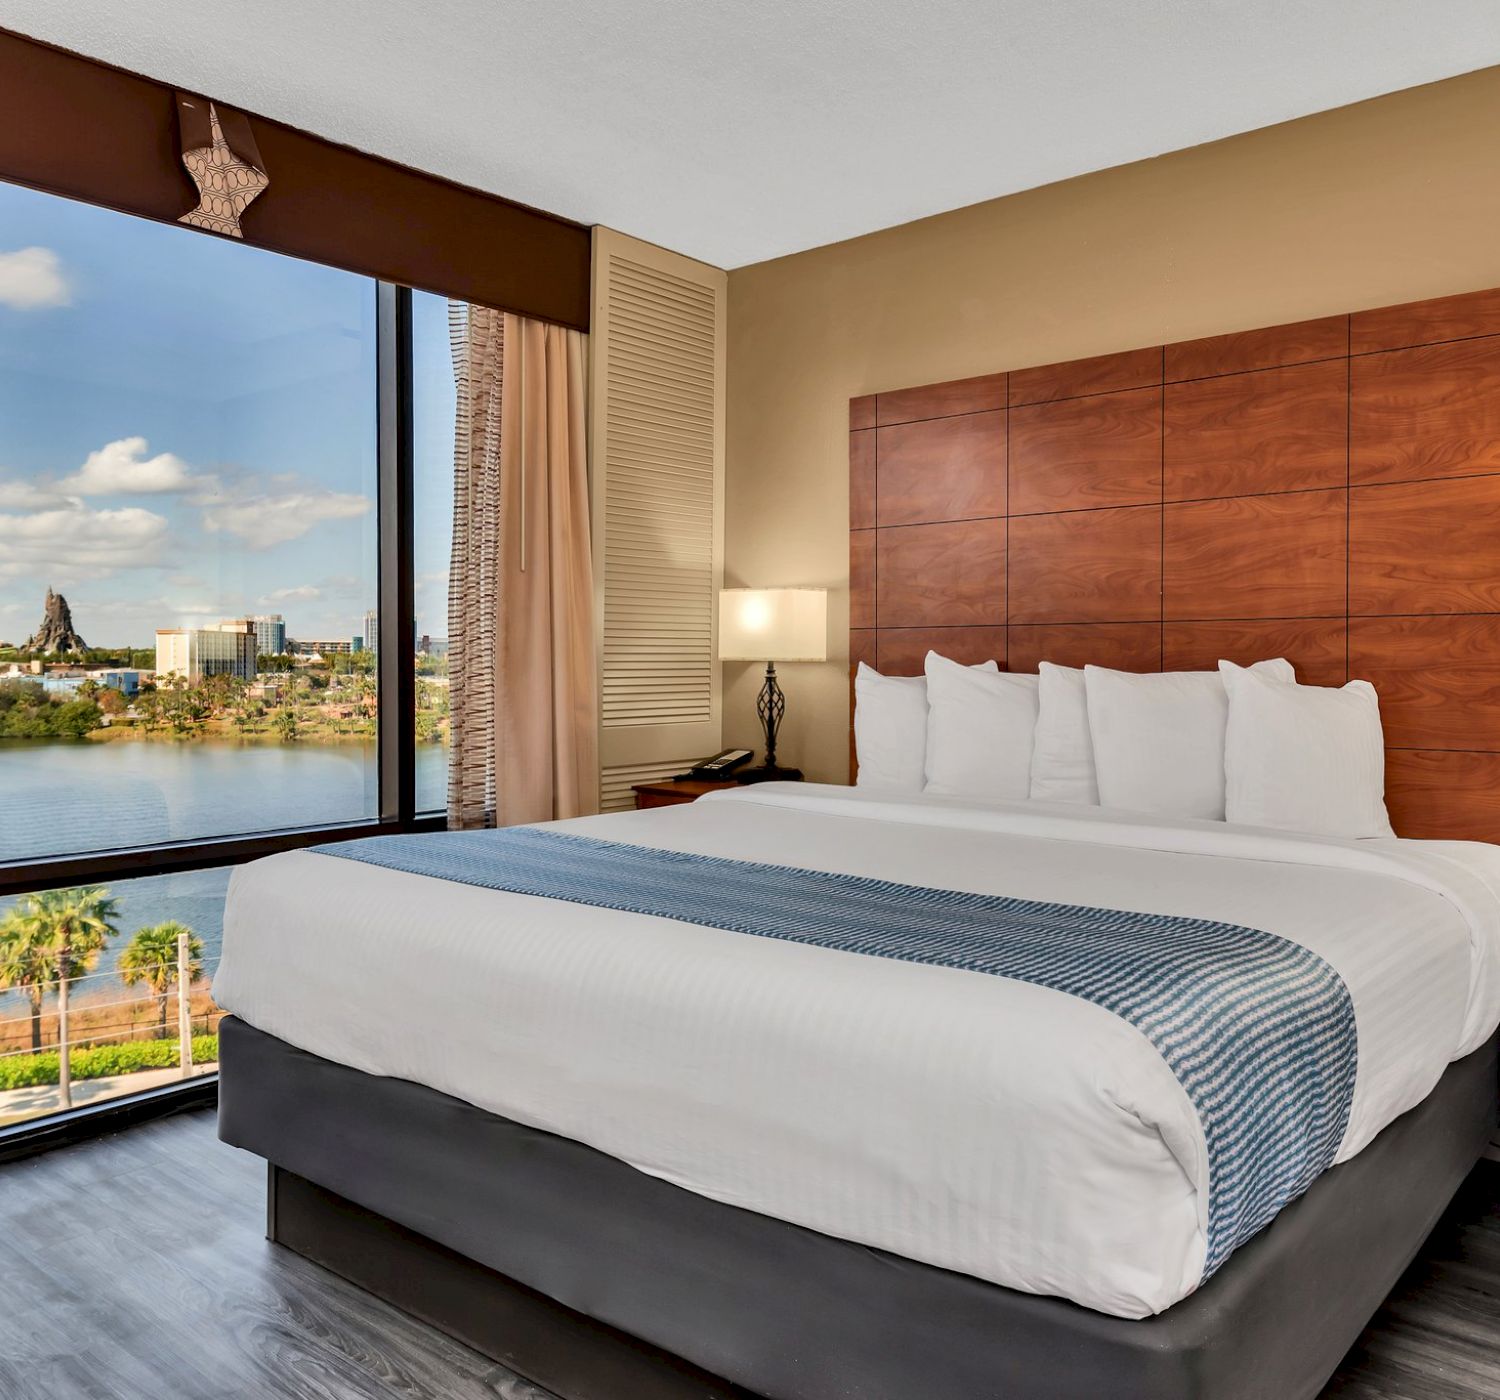 A hotel room with a large bed, bedside tables with lamps, and a view of the cityscape and lake through a wide window.